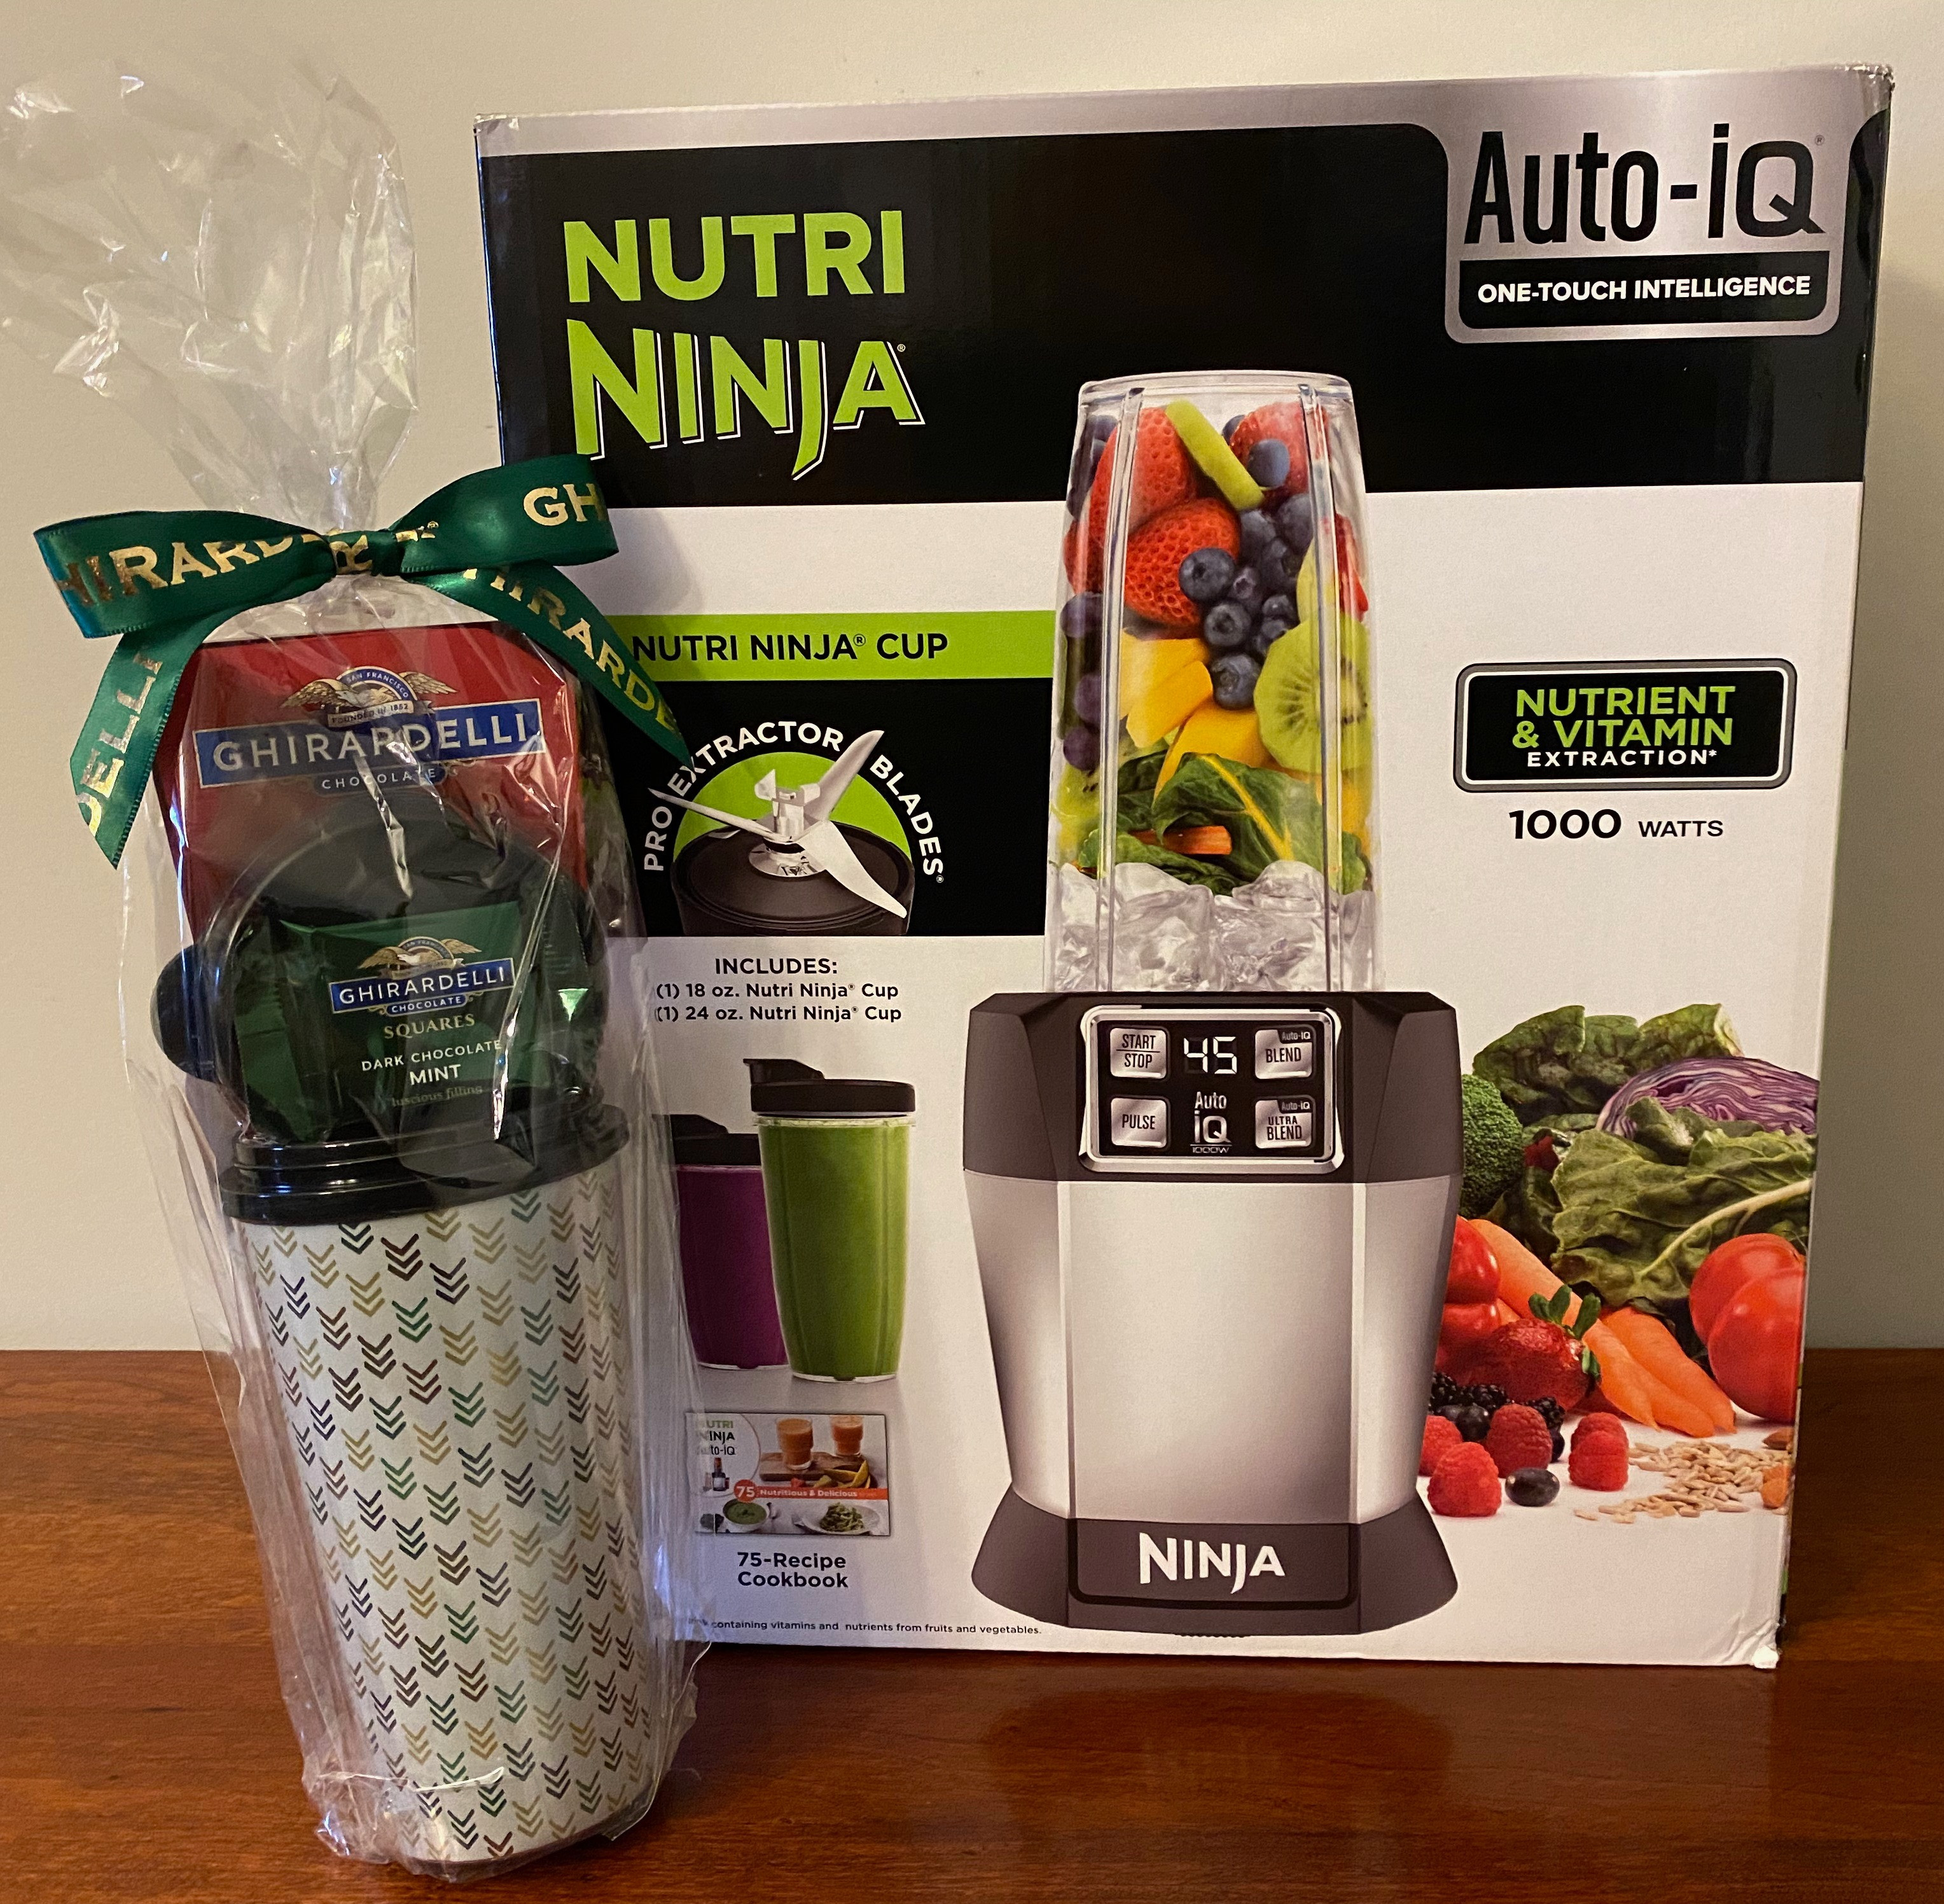 The great Nutri Ninja Smoothie Maker - small, yet powerful.